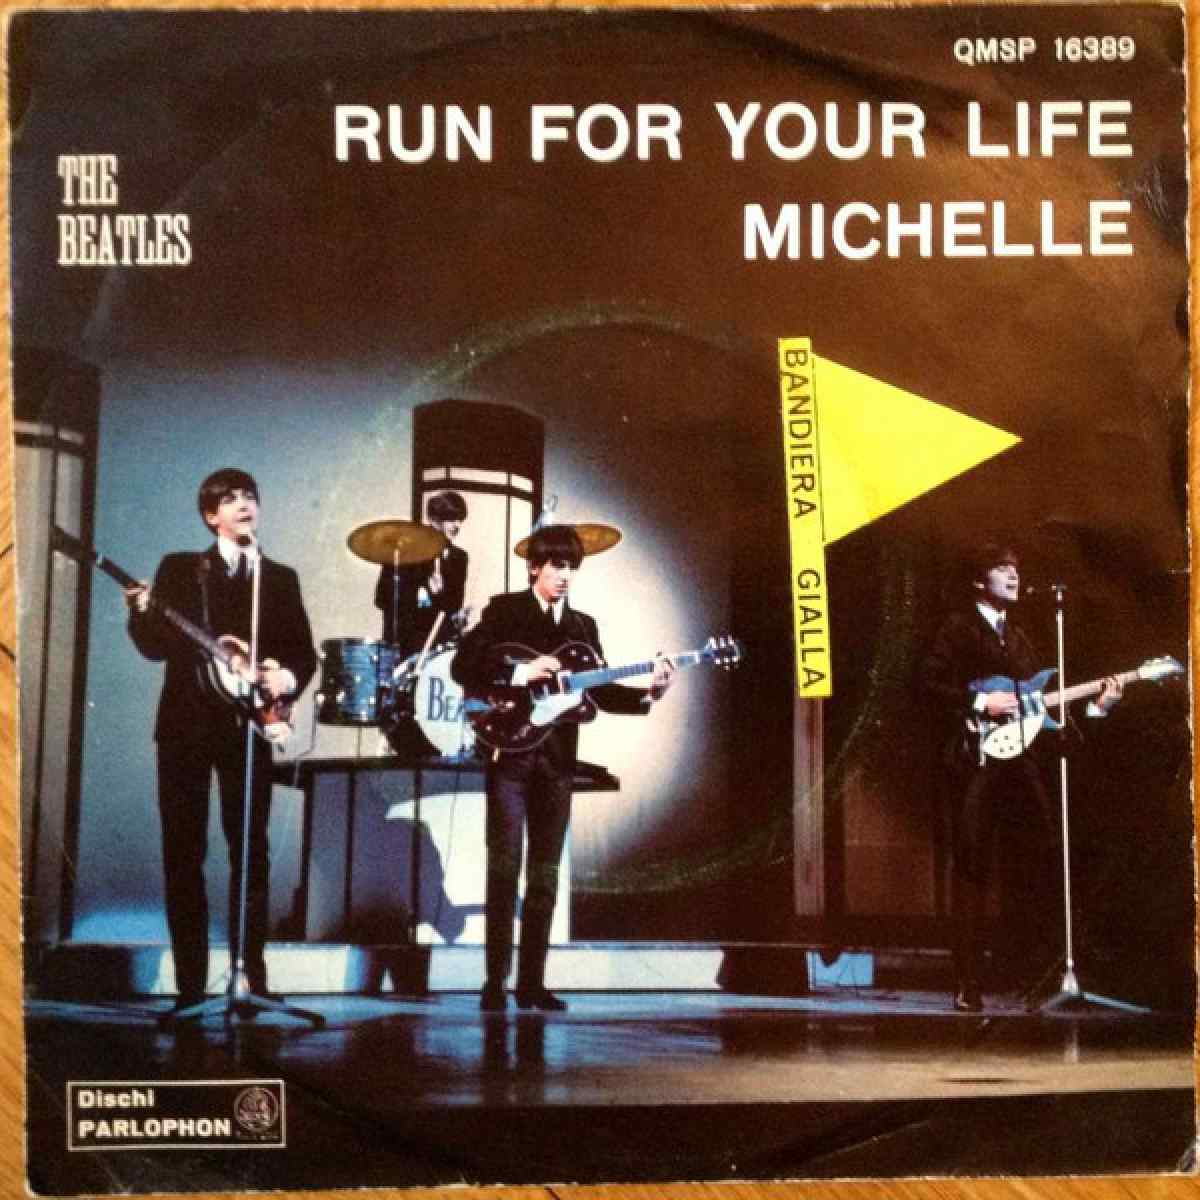 <a href="https://www.discogs.com/artist/82730-The-Beatles">The Beatles</a> ‎– Run For Your Life/Michelle Vinyl disc released on 14 Feb, 1966.